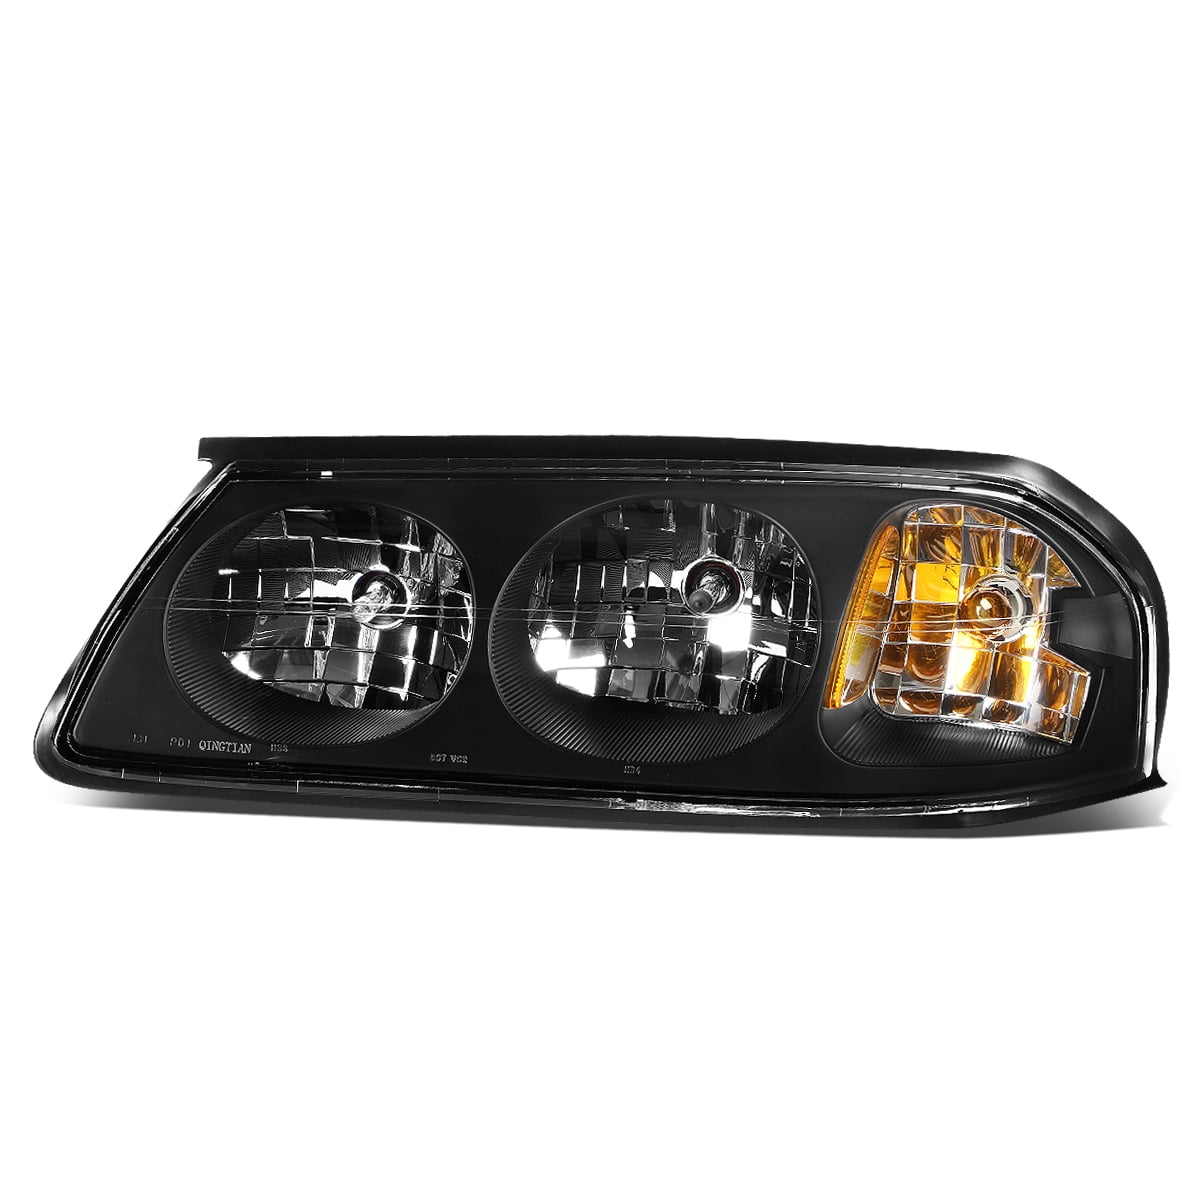 DNA Motoring OEM-HL-0036-L Factory Style Driver/Left Side Headlight Lamp Assembly Replacement